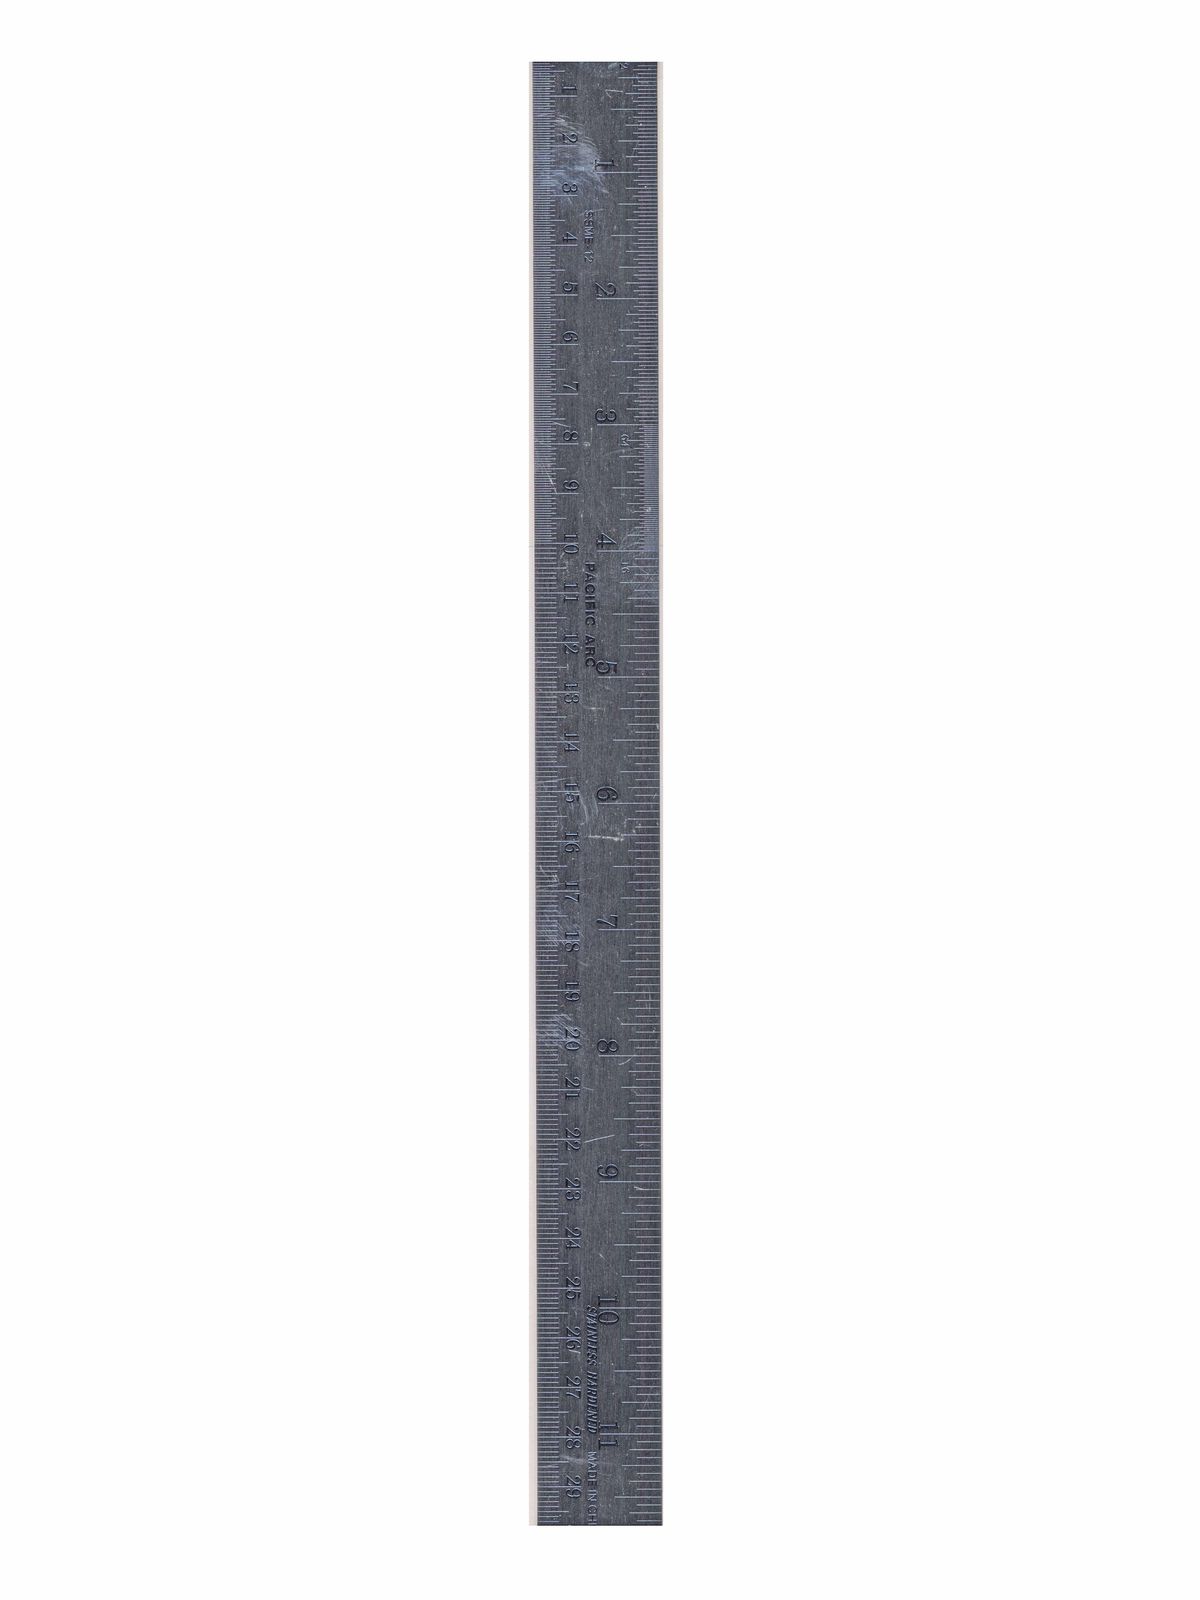 Stainless Steel Rulers Inch Metric With Conversion Table 12 In.